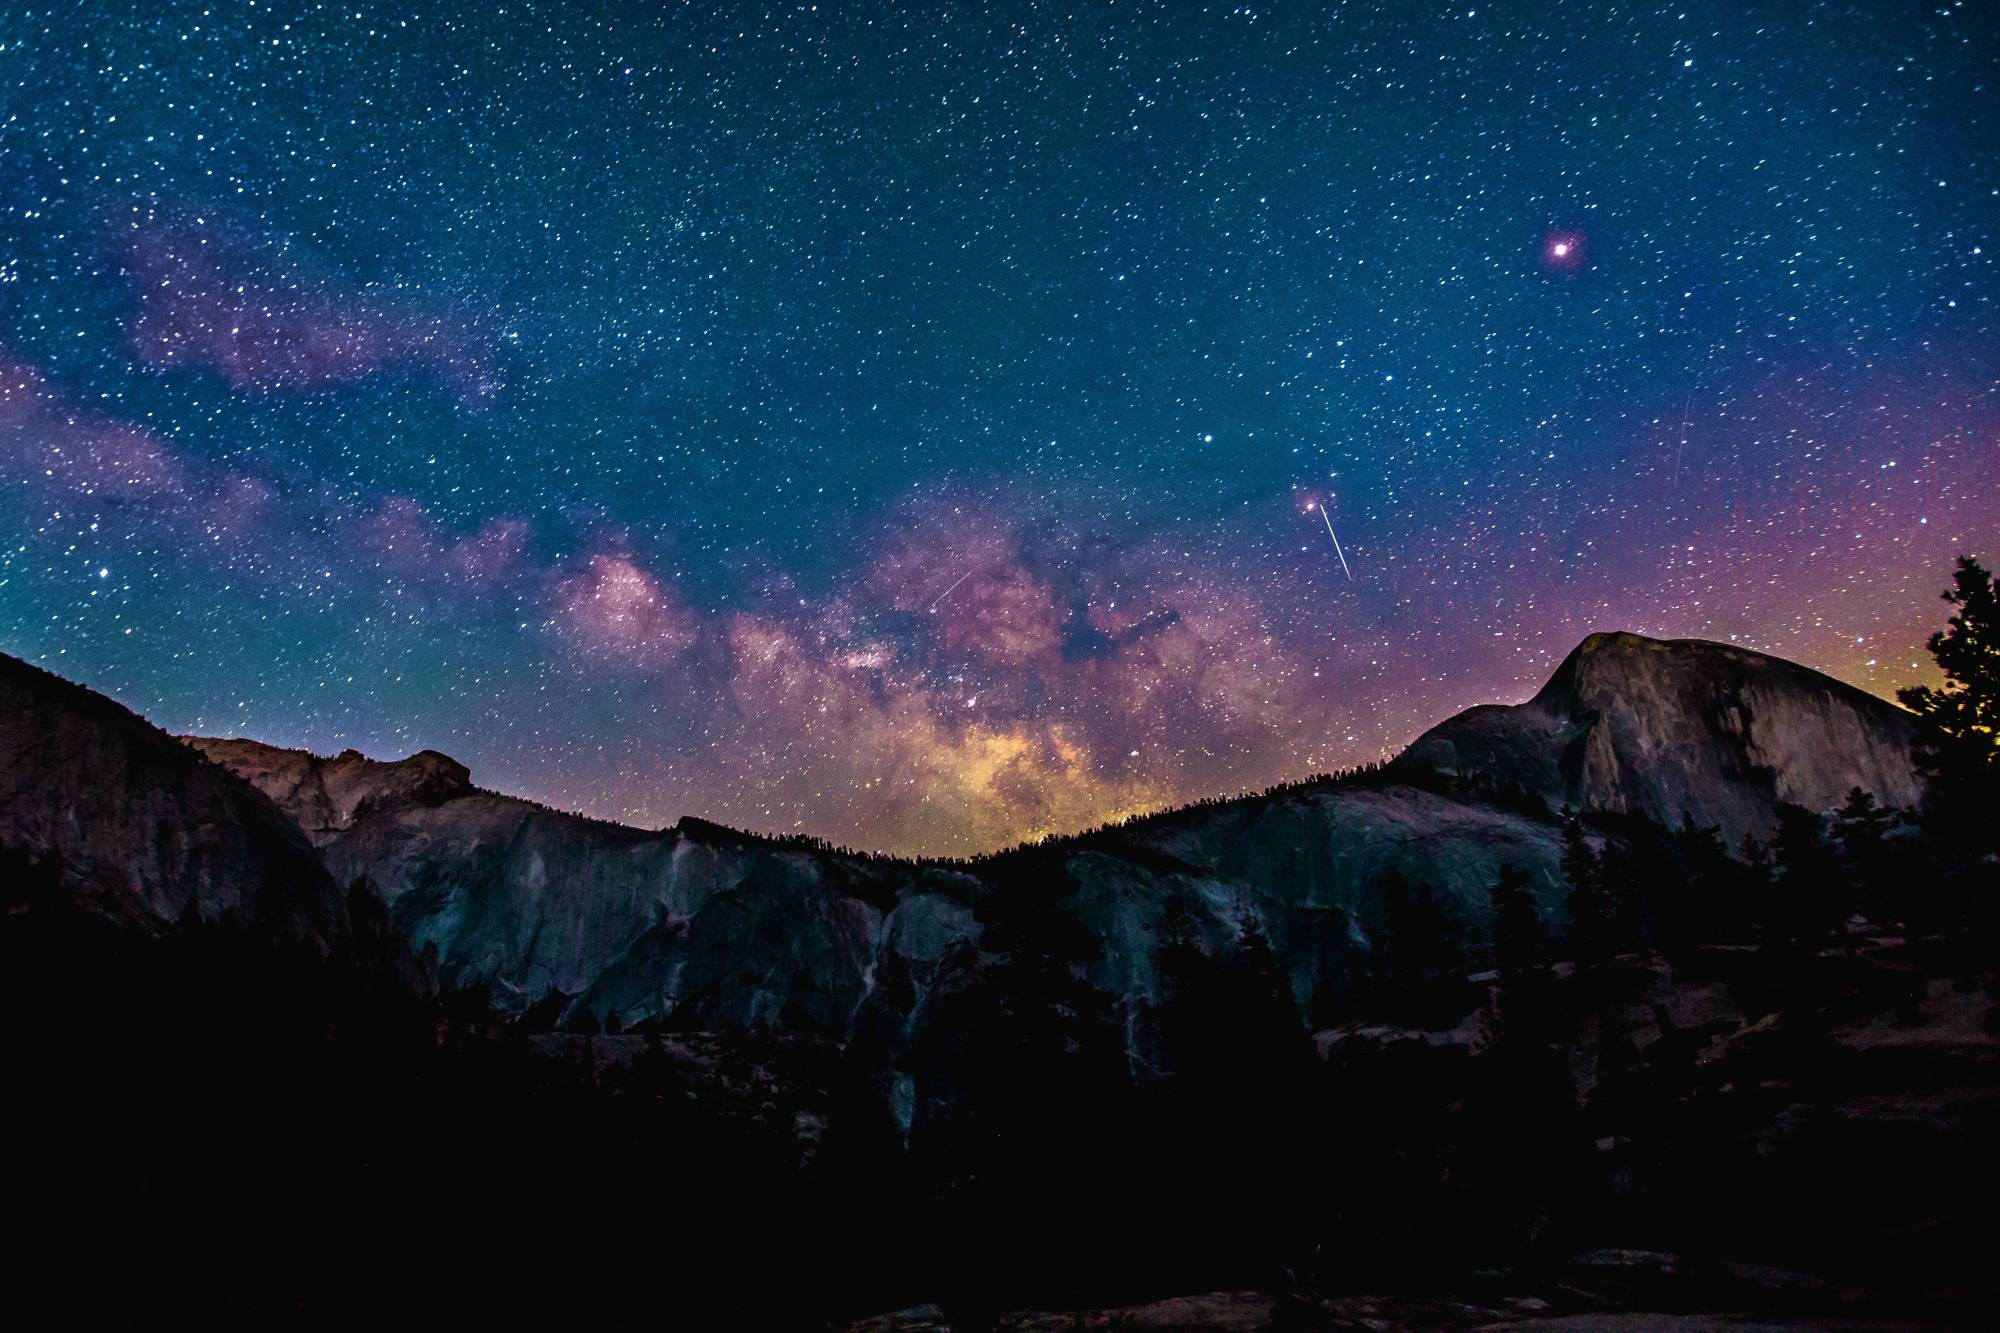 Starry night set behind mountain scape